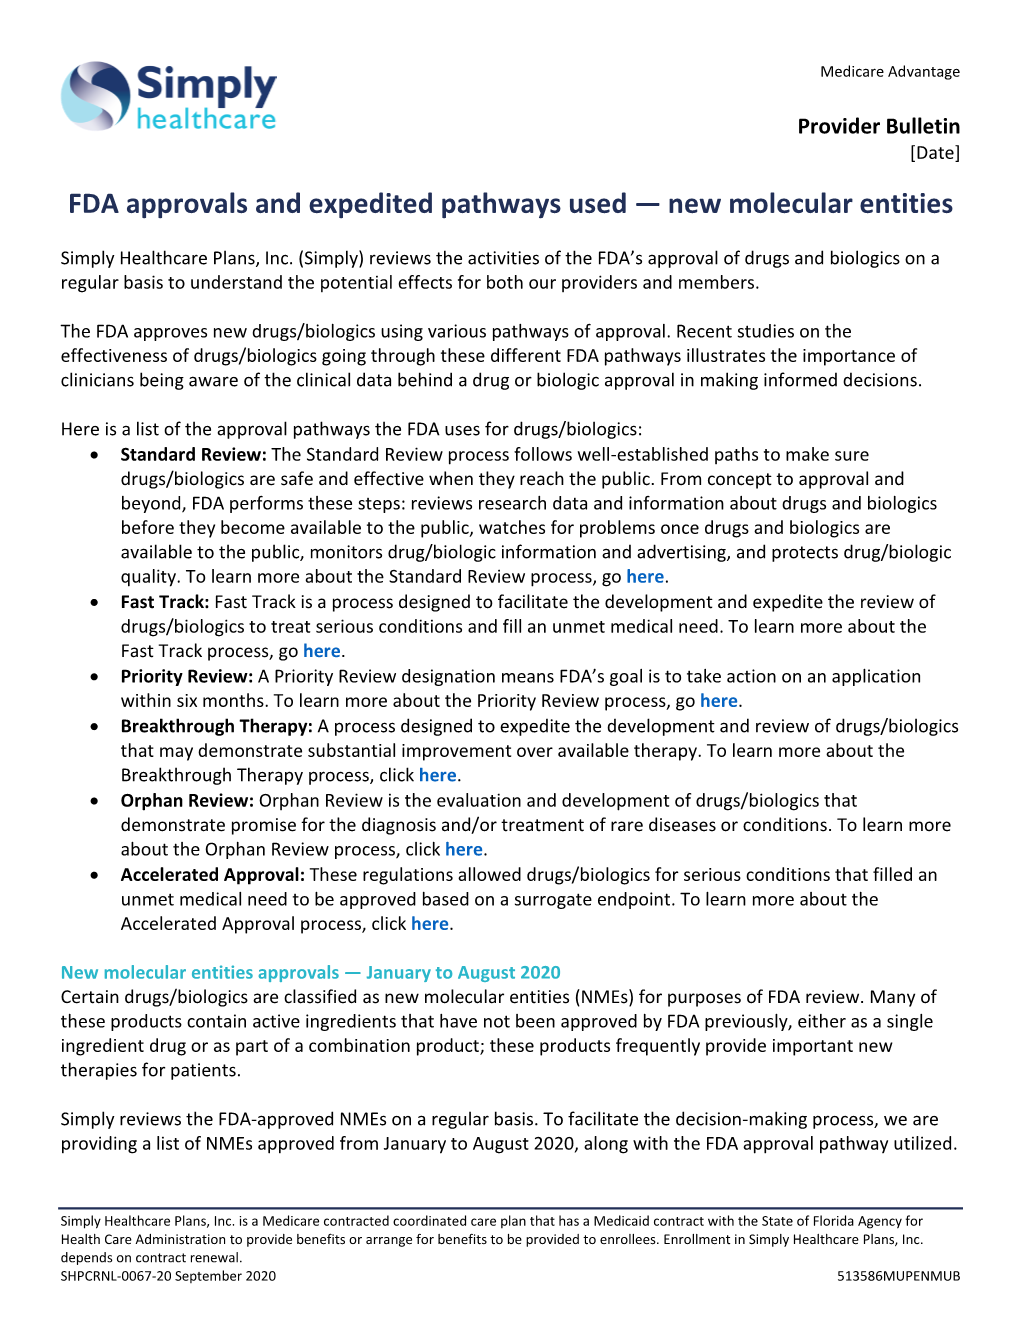 FDA Approvals and Expedited Pathways Used — New Molecular Entities